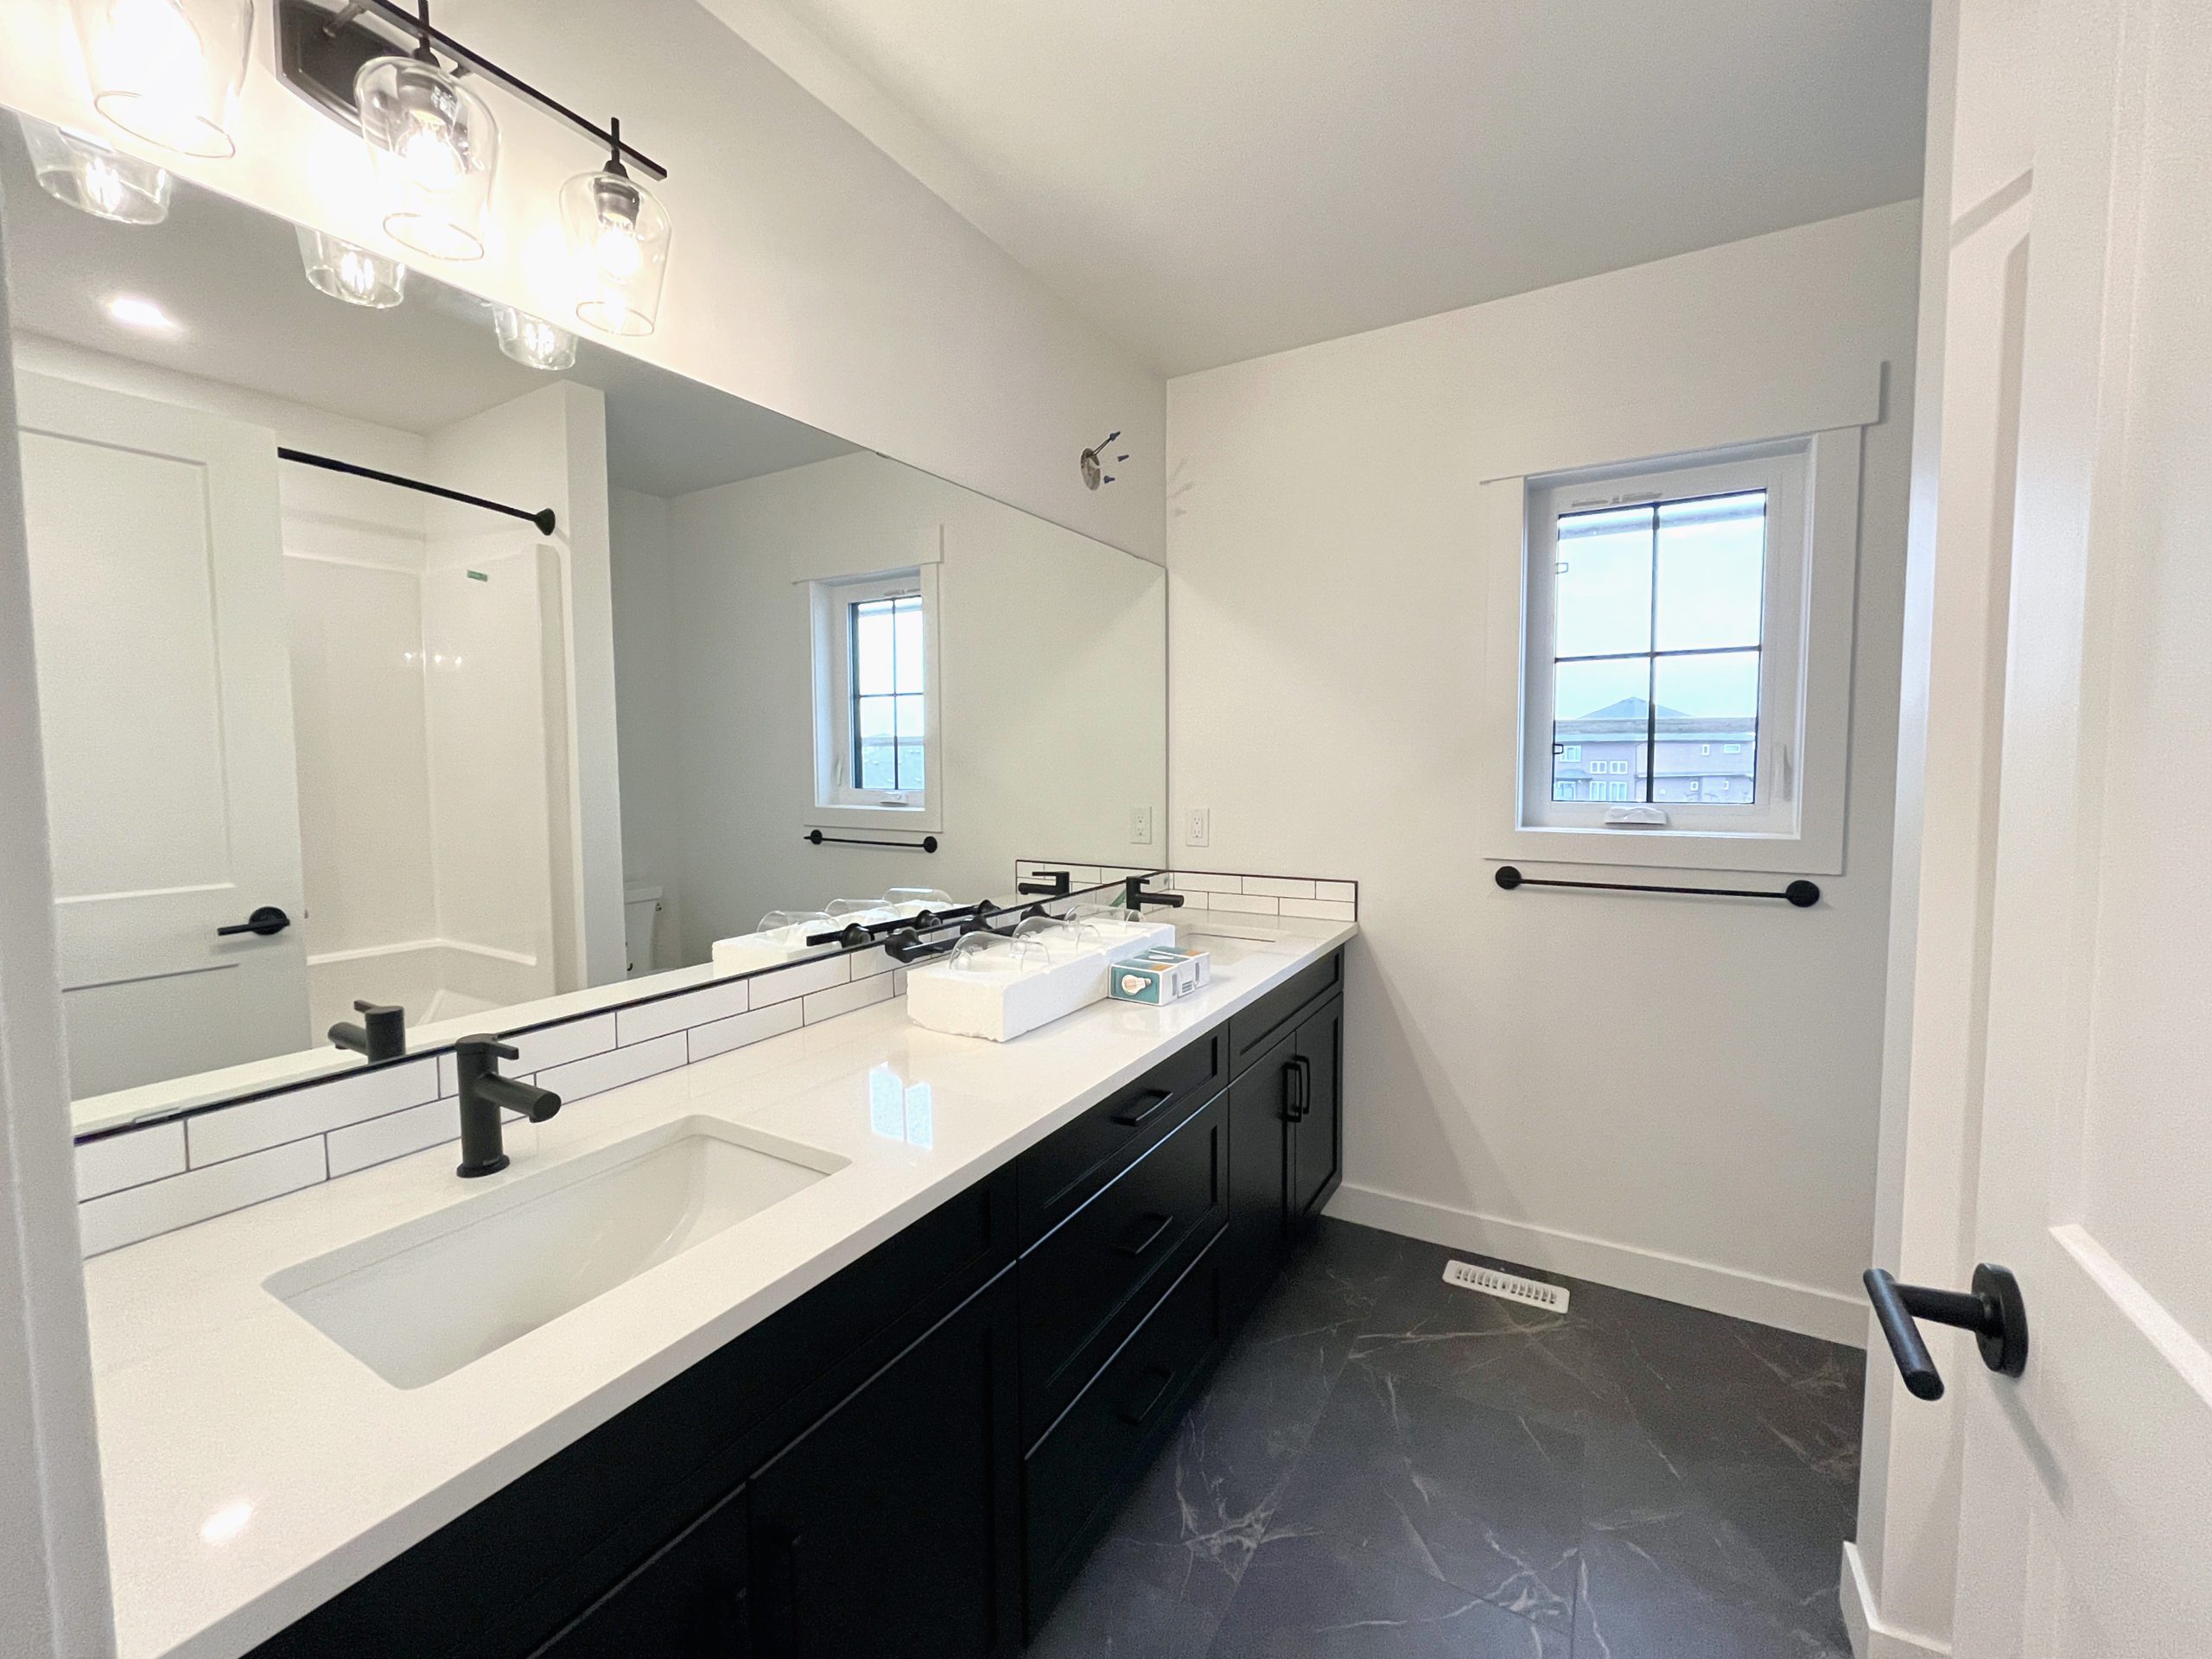 A family bathroom with double sinks and a large mirror.